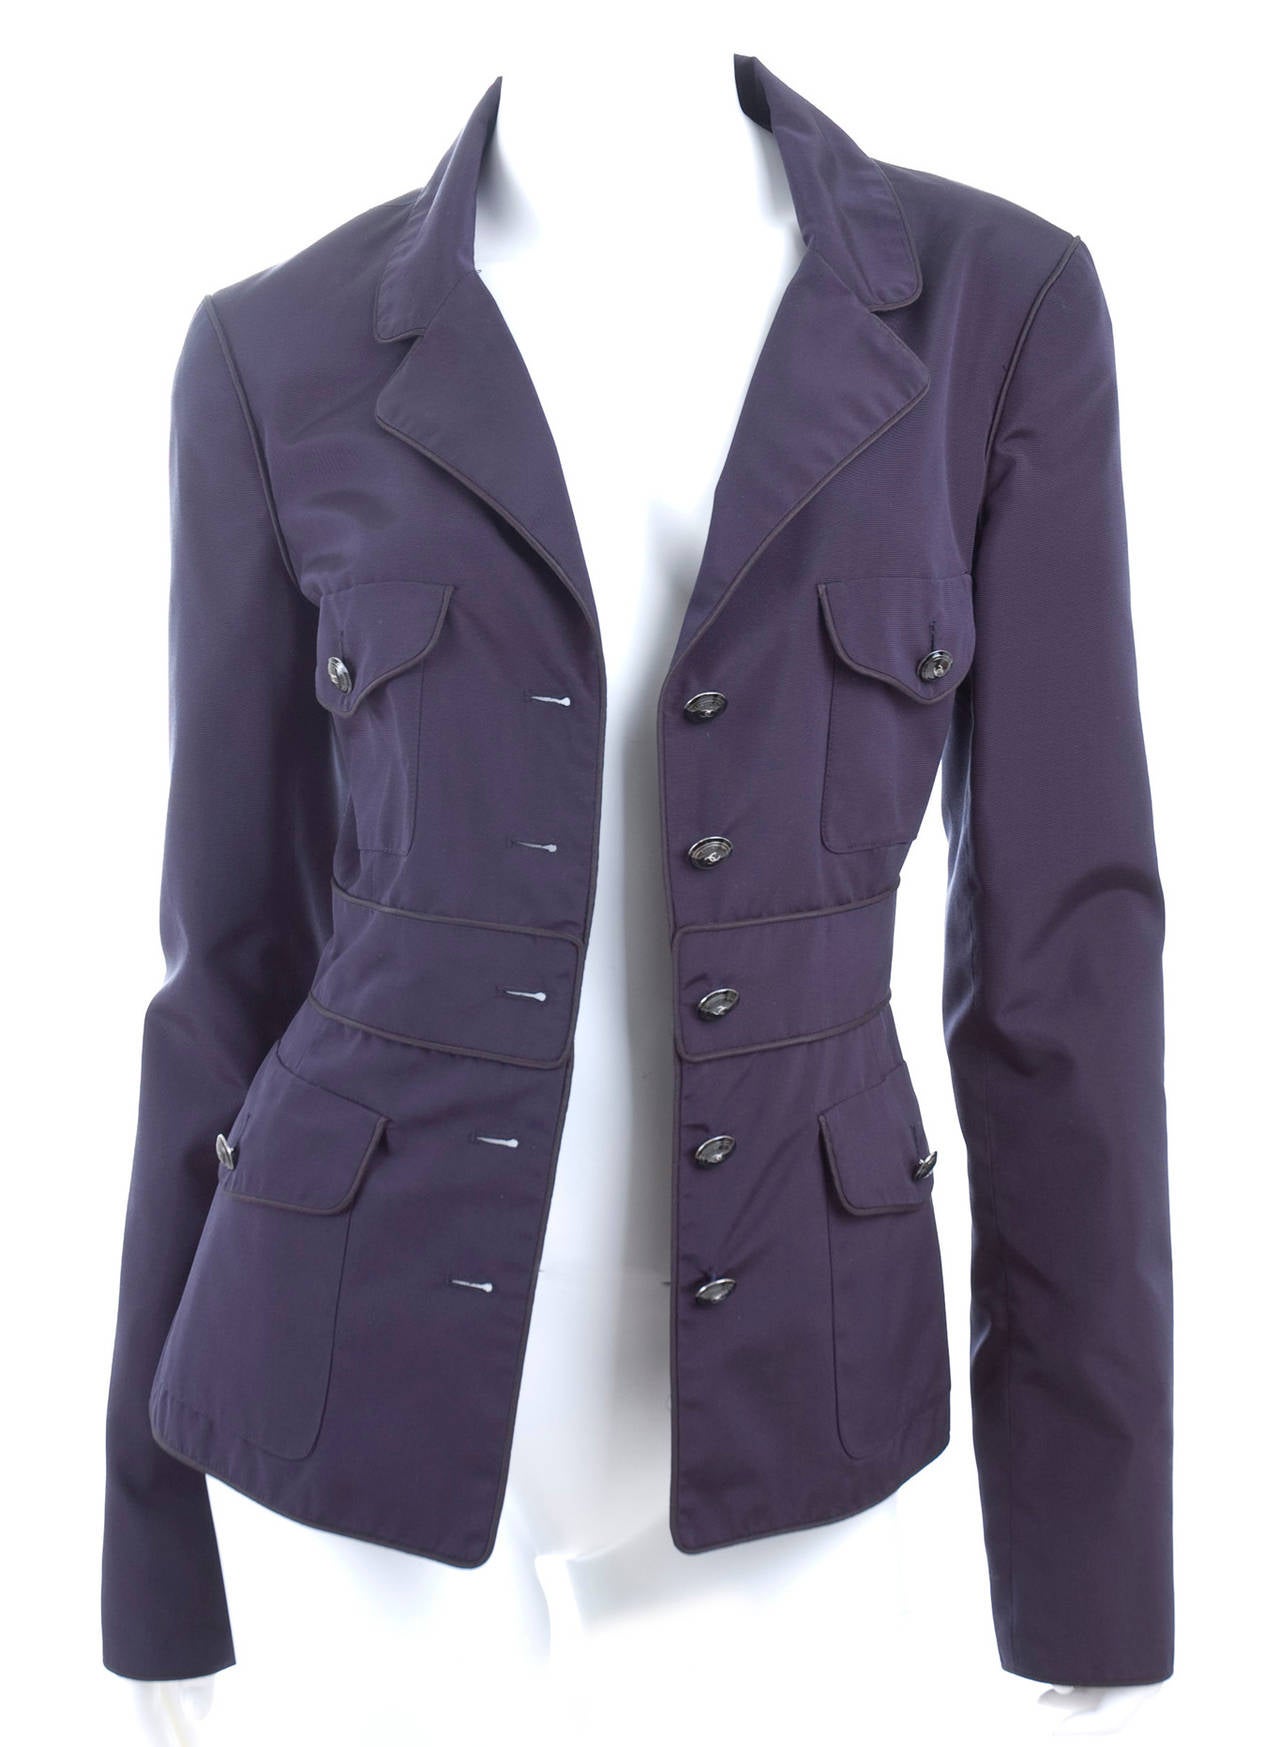 Chanel Silk Jacket in Navy with black trim on all seams.
Size 40 FR 
100% Silk
Collection 2007
Measurements: 
Length 24